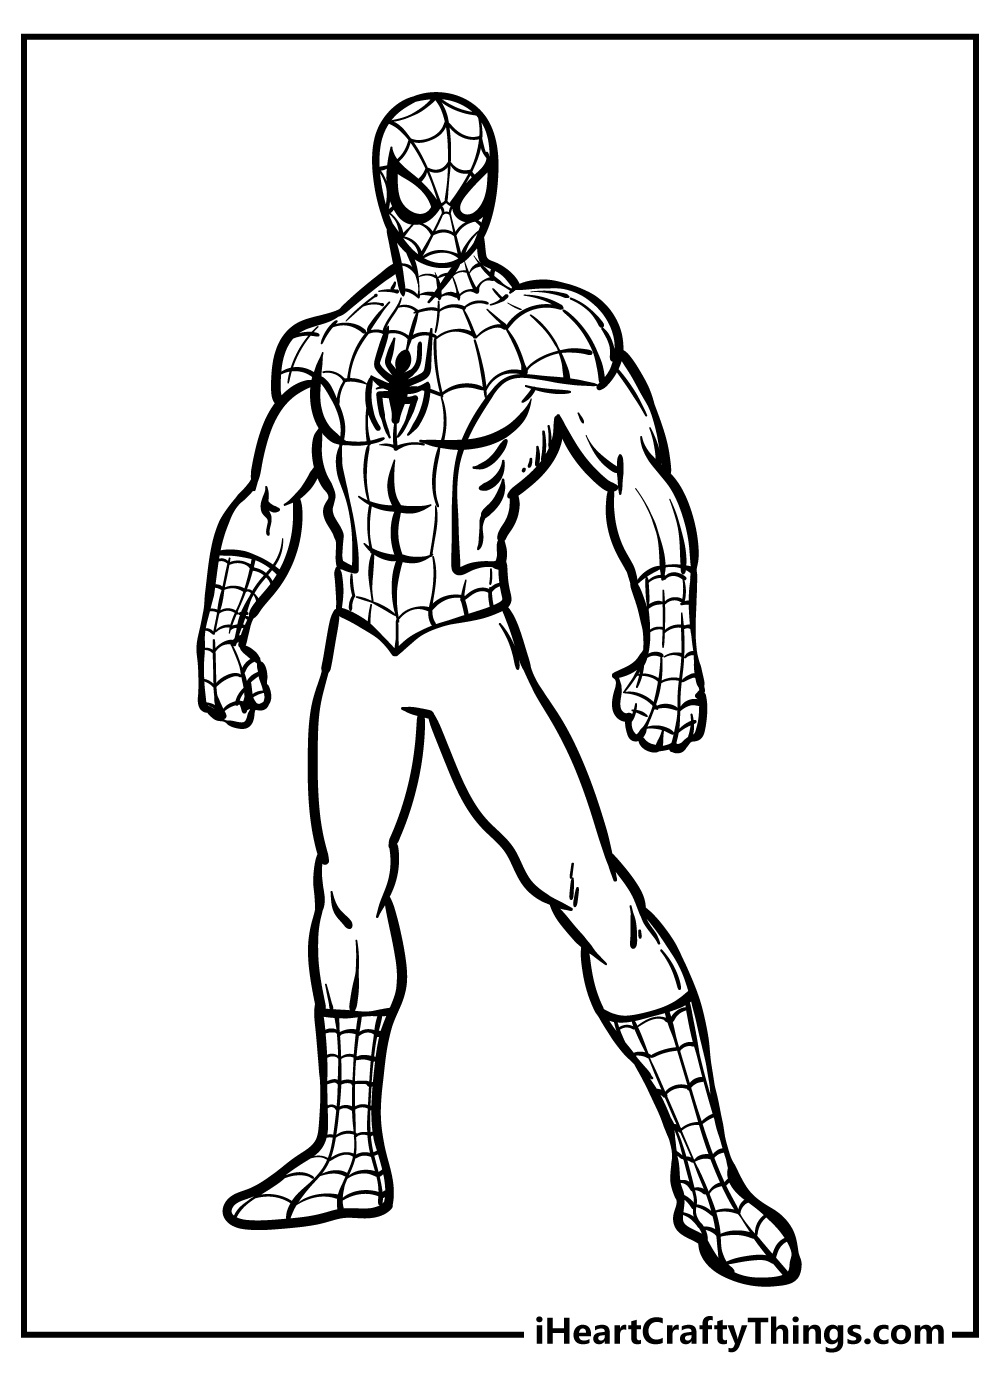 Spider-Man Coloring Pages for kids free download